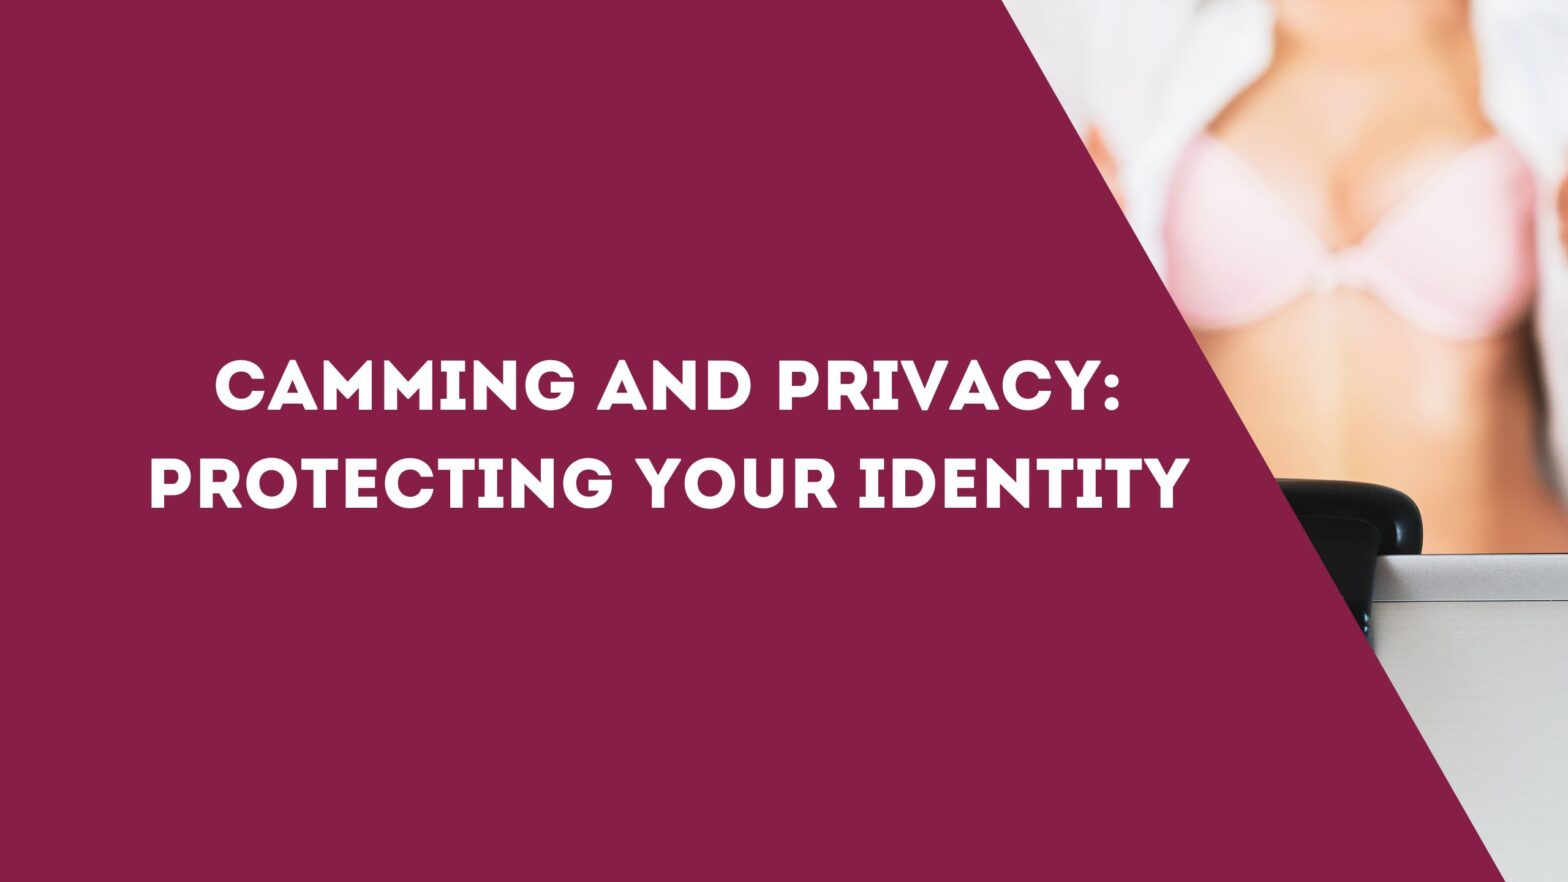 Camming and Privacy: Protecting Your Identity